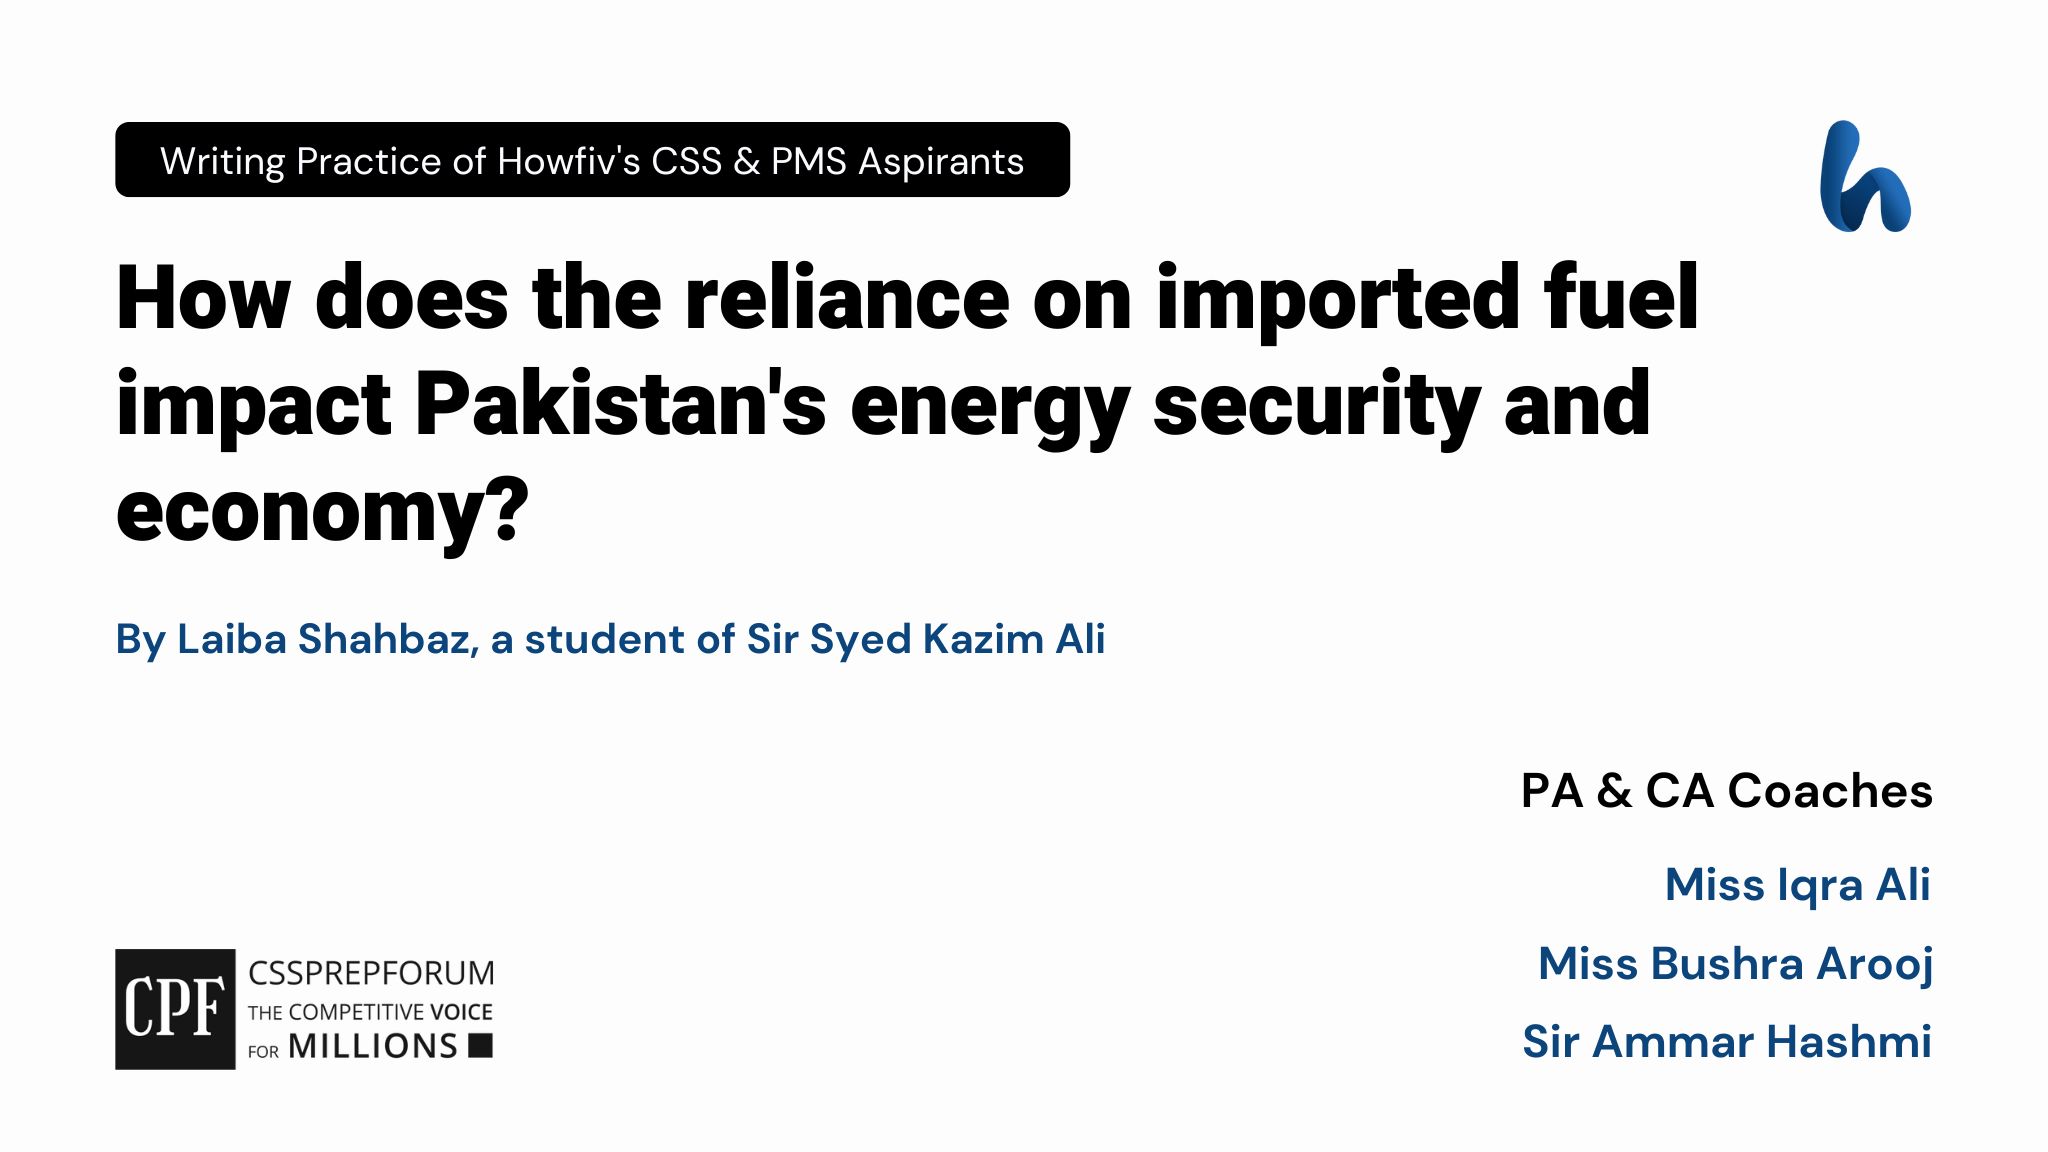 Implications of Imported Fuel on Pakistan's Energy Security by Laiba Shahbaz